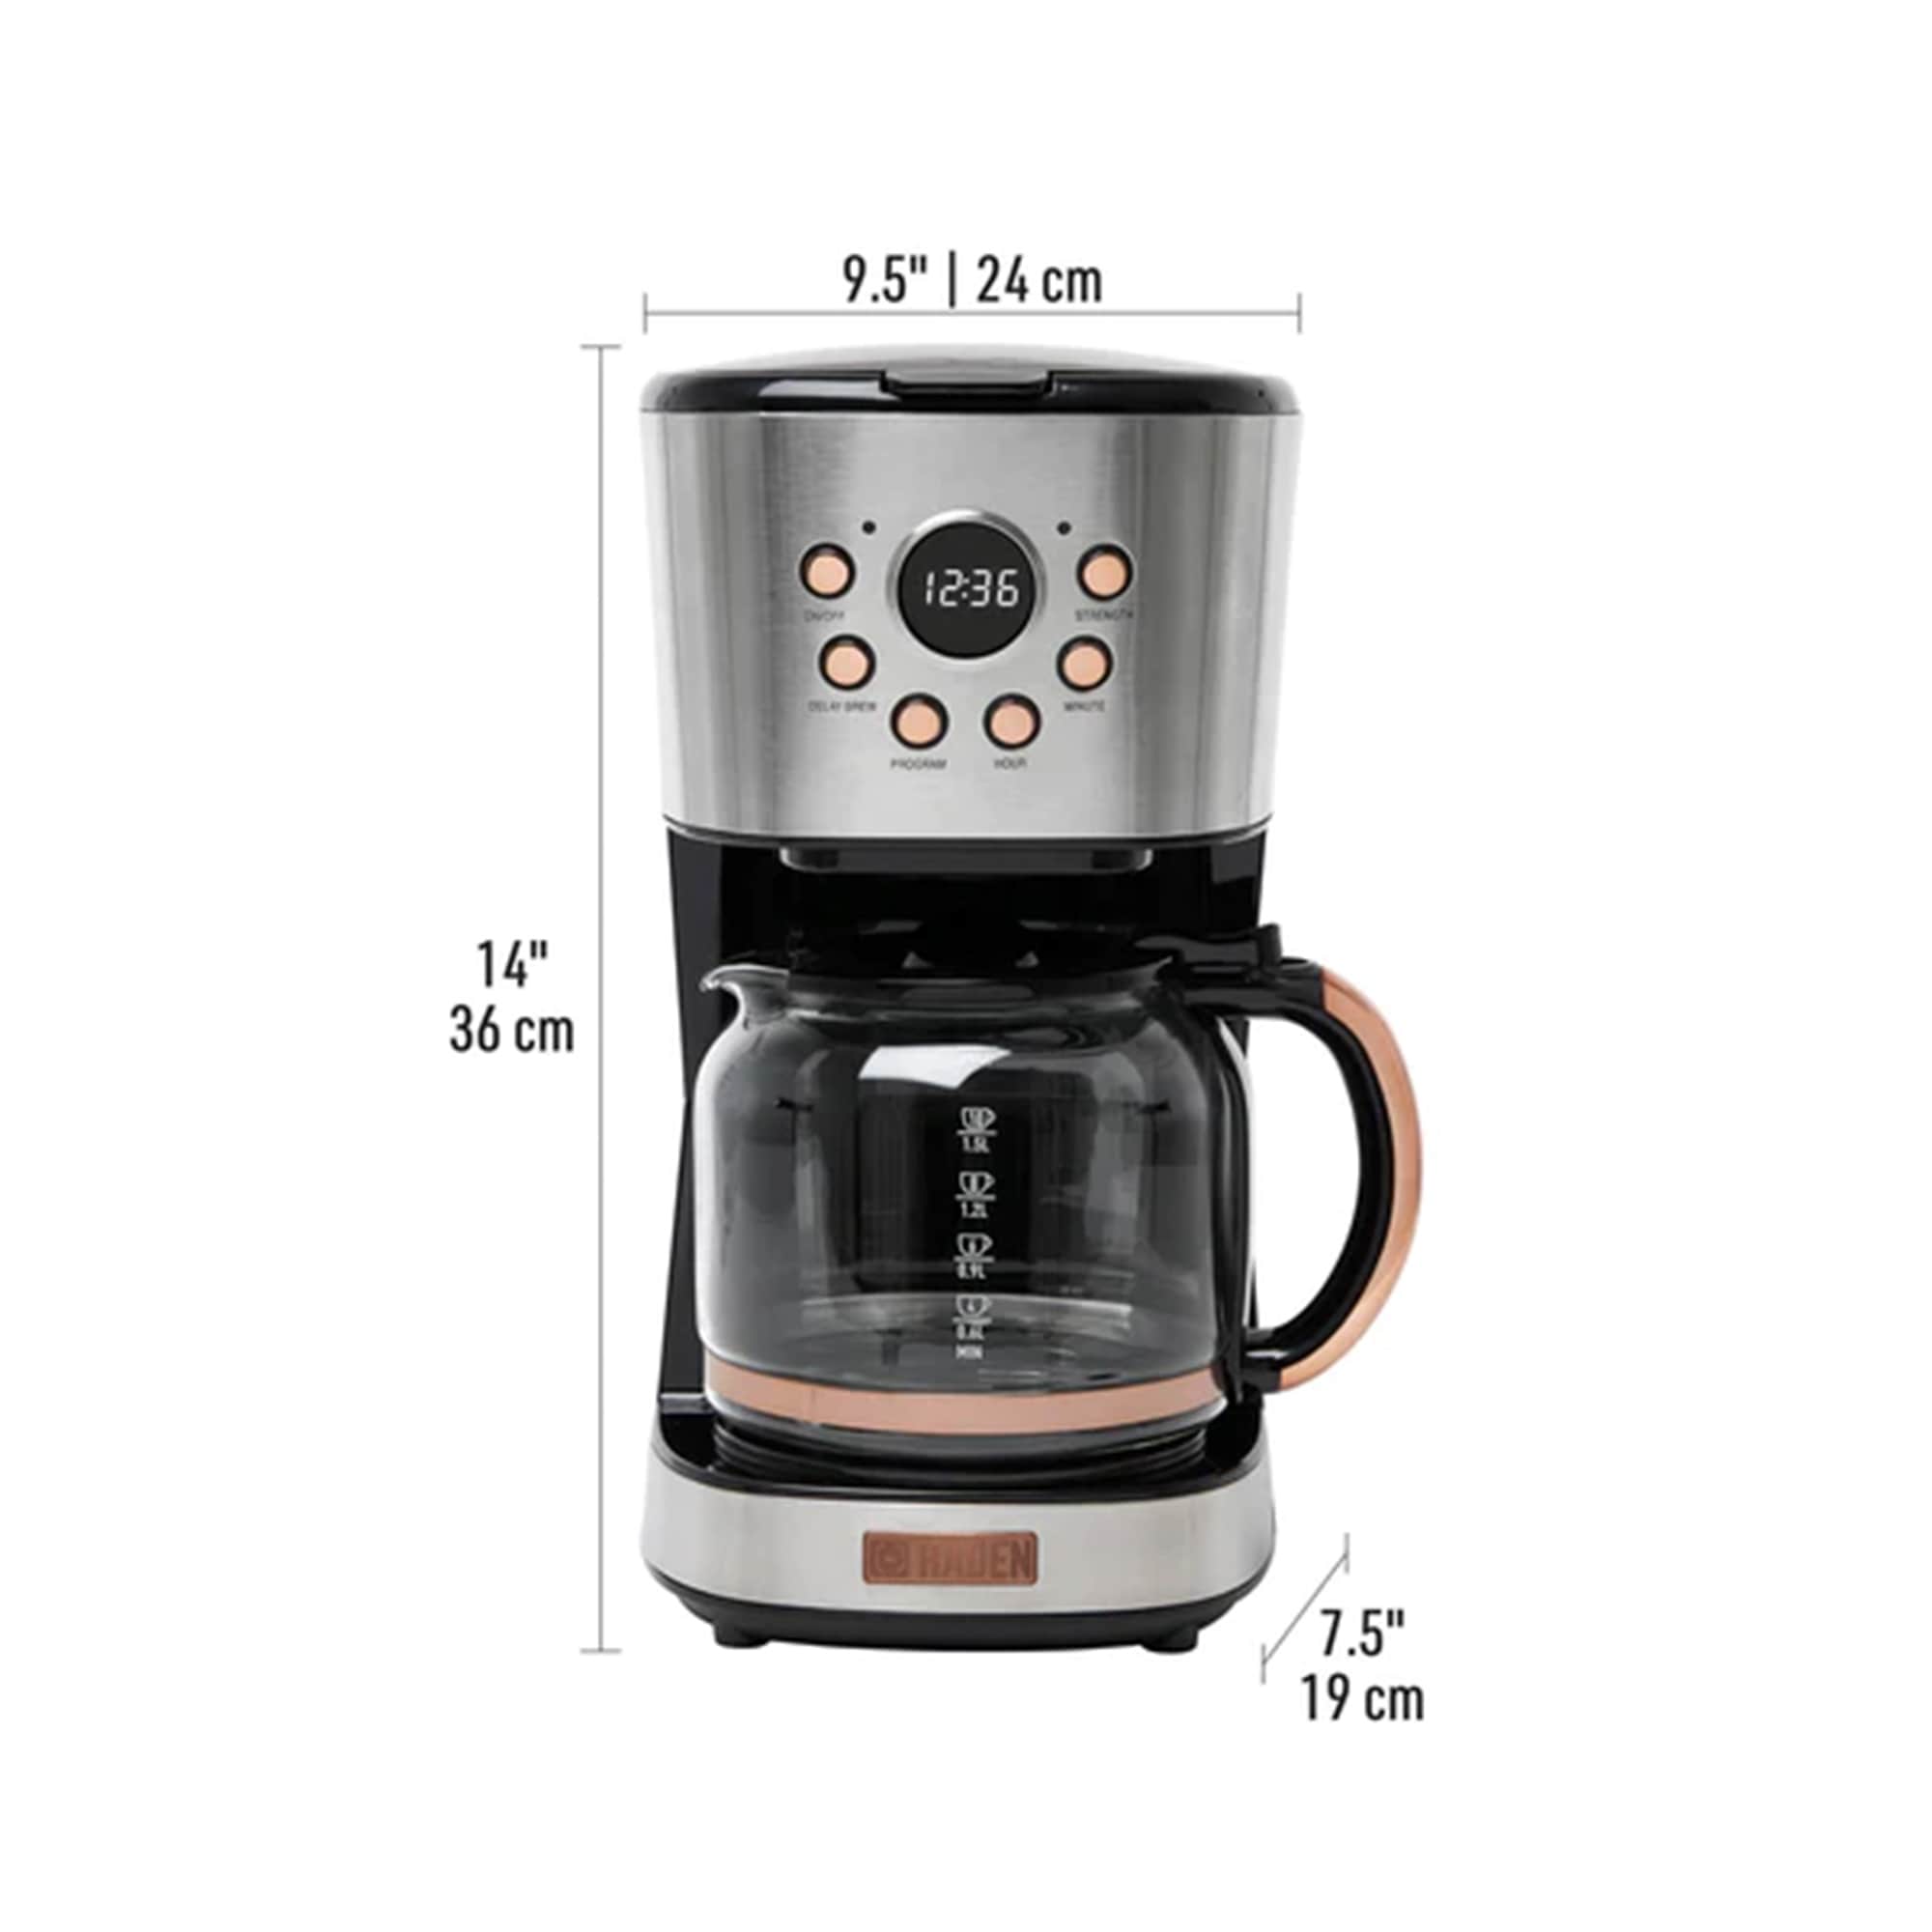 https://ak1.ostkcdn.com/images/products/is/images/direct/c1cc886790ca53fea7a1a5bb040d888bf99d1942/Haden-Heritage-12-Cup-Programmable-Retro-Coffee-Maker-Machine%2C-Steel-Copper.jpg